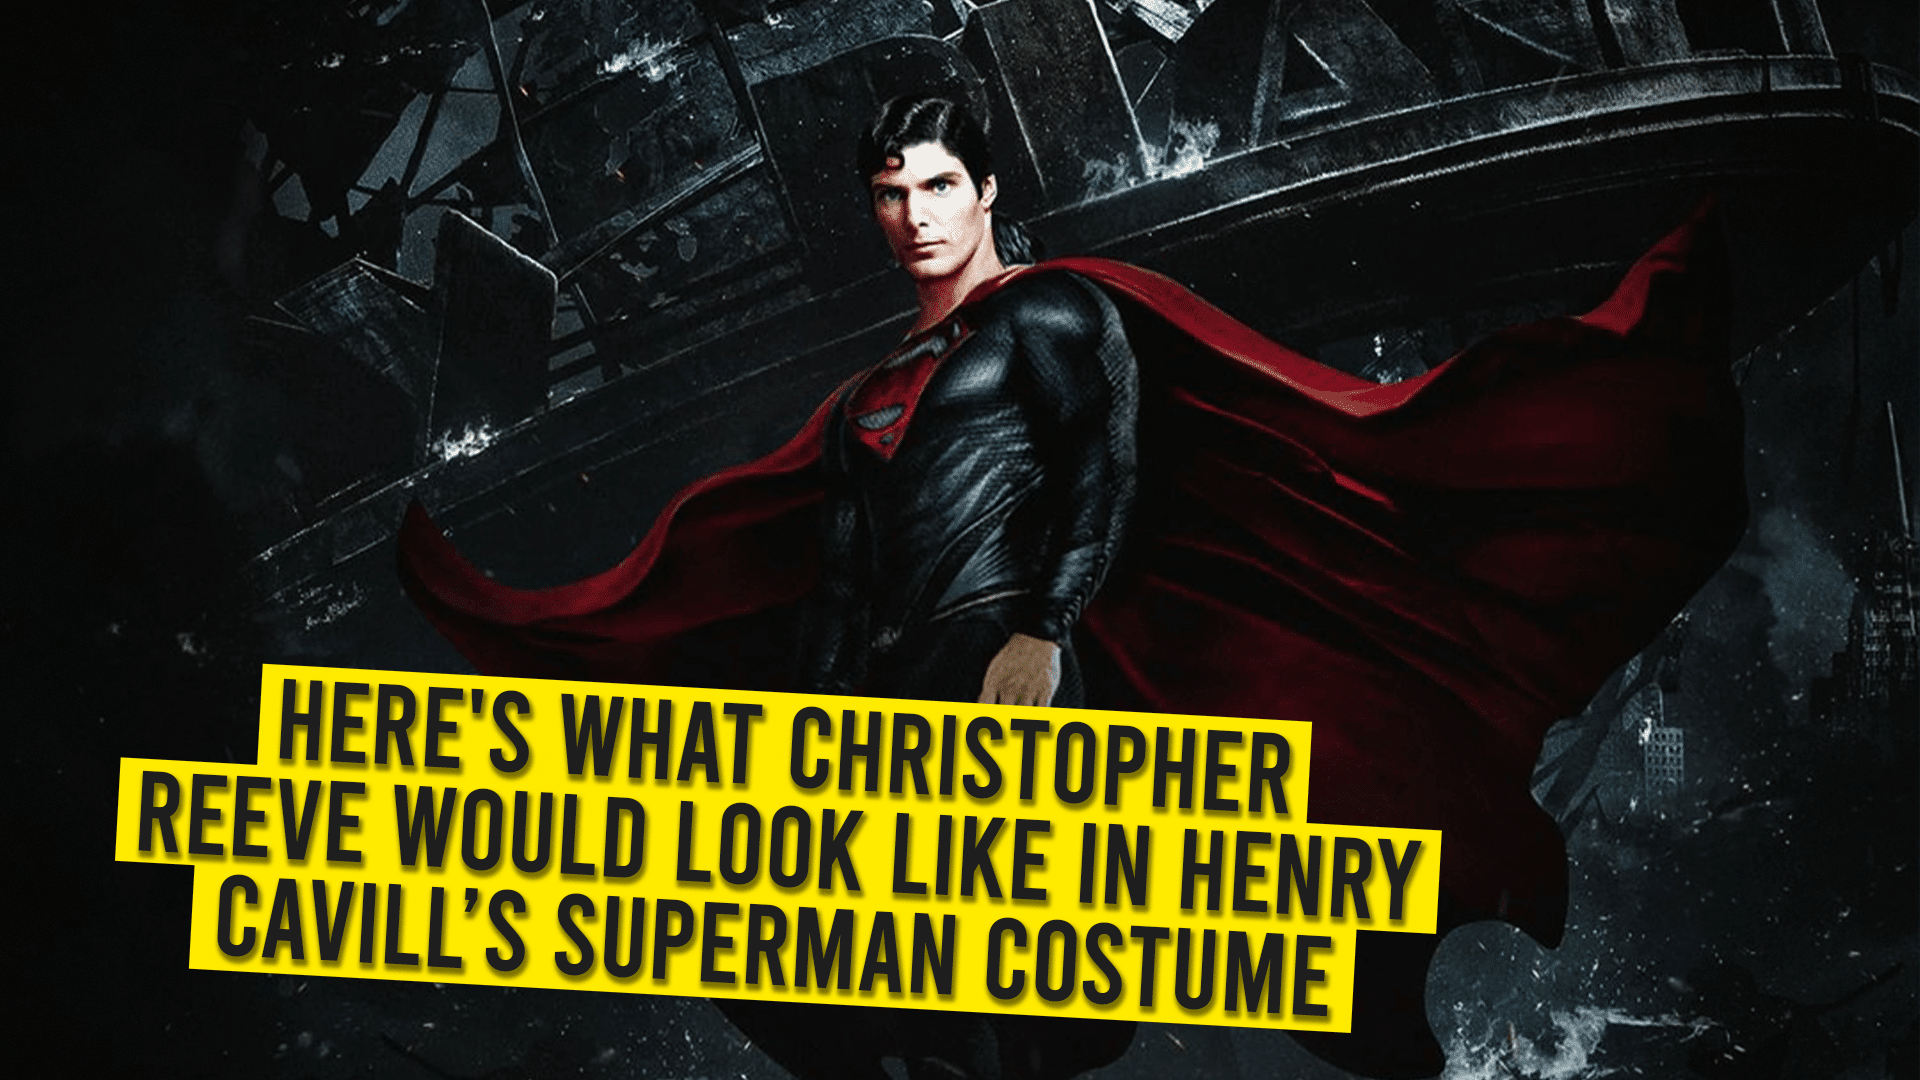 Here’s What Christopher Reeve Would Look Like In Henry Cavill’s Superman Costume